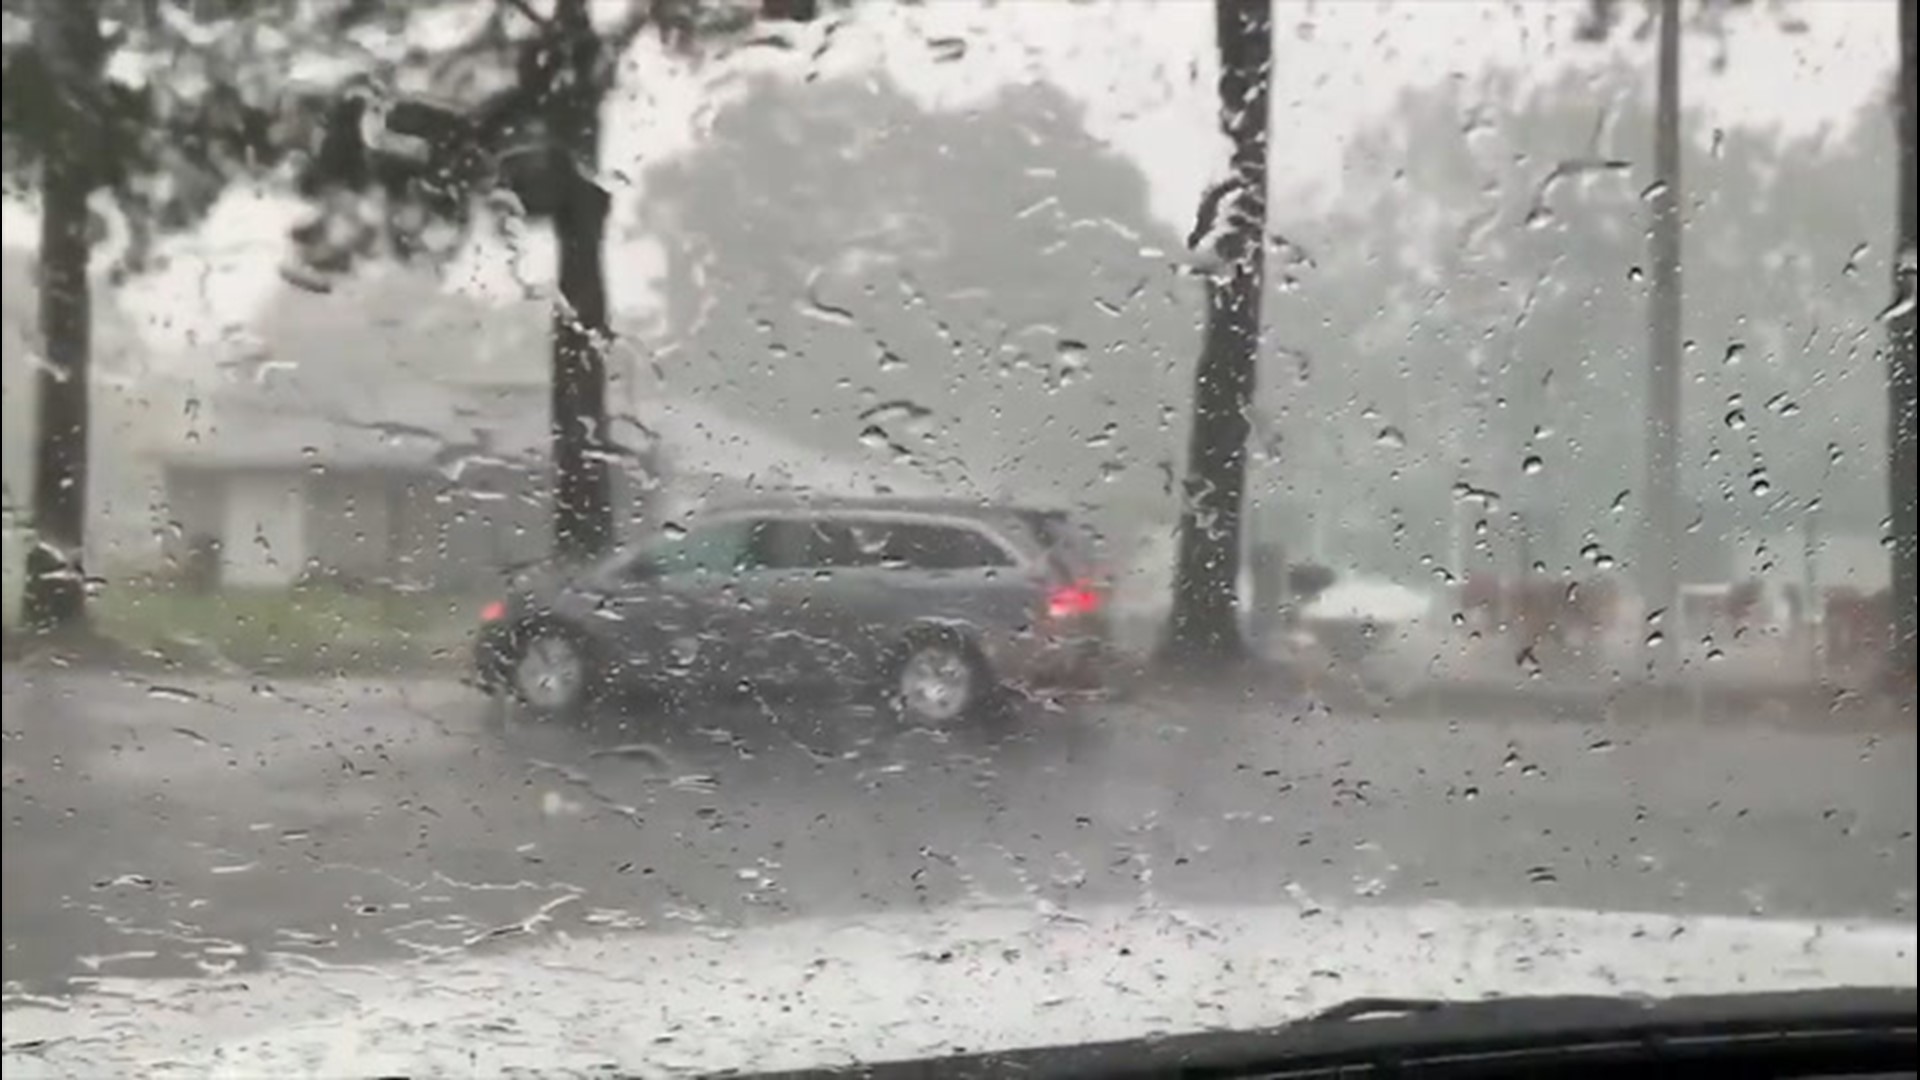 Storms on July 1 produced heavy rain and pea to dime size hail in the Kempsville area of Virginia Beach, Virginia.